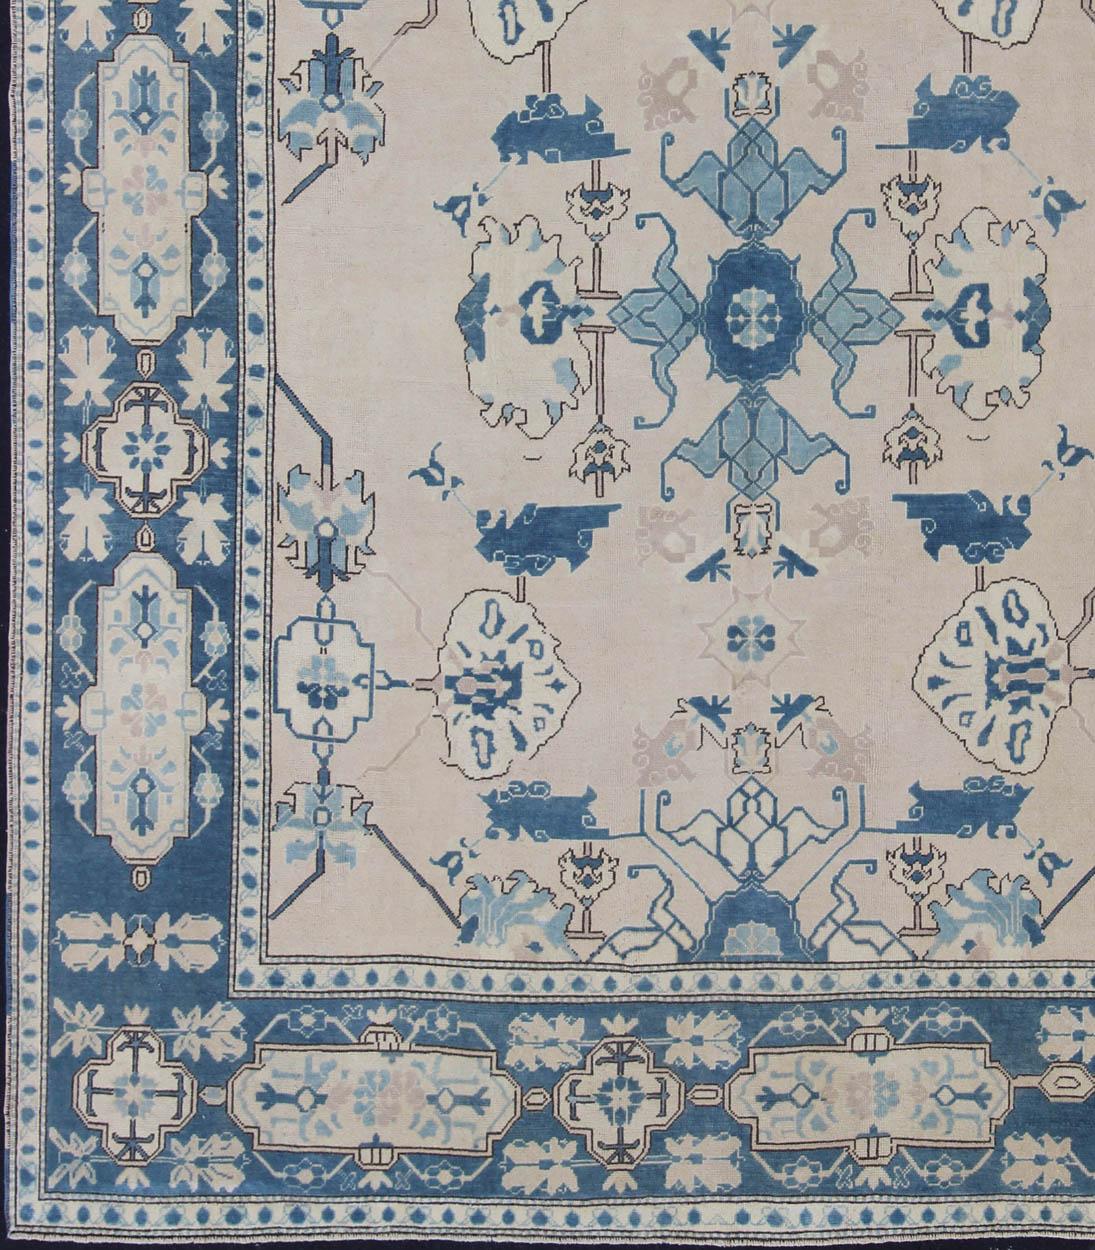 Vintage Turkish Oushak in cream and blue, rug en-165875, country of origin / type: Turkey / Oushak, circa 1940

This tribal design Oushak carpet features an array of motifs expanding across the central field. The thick border features a large